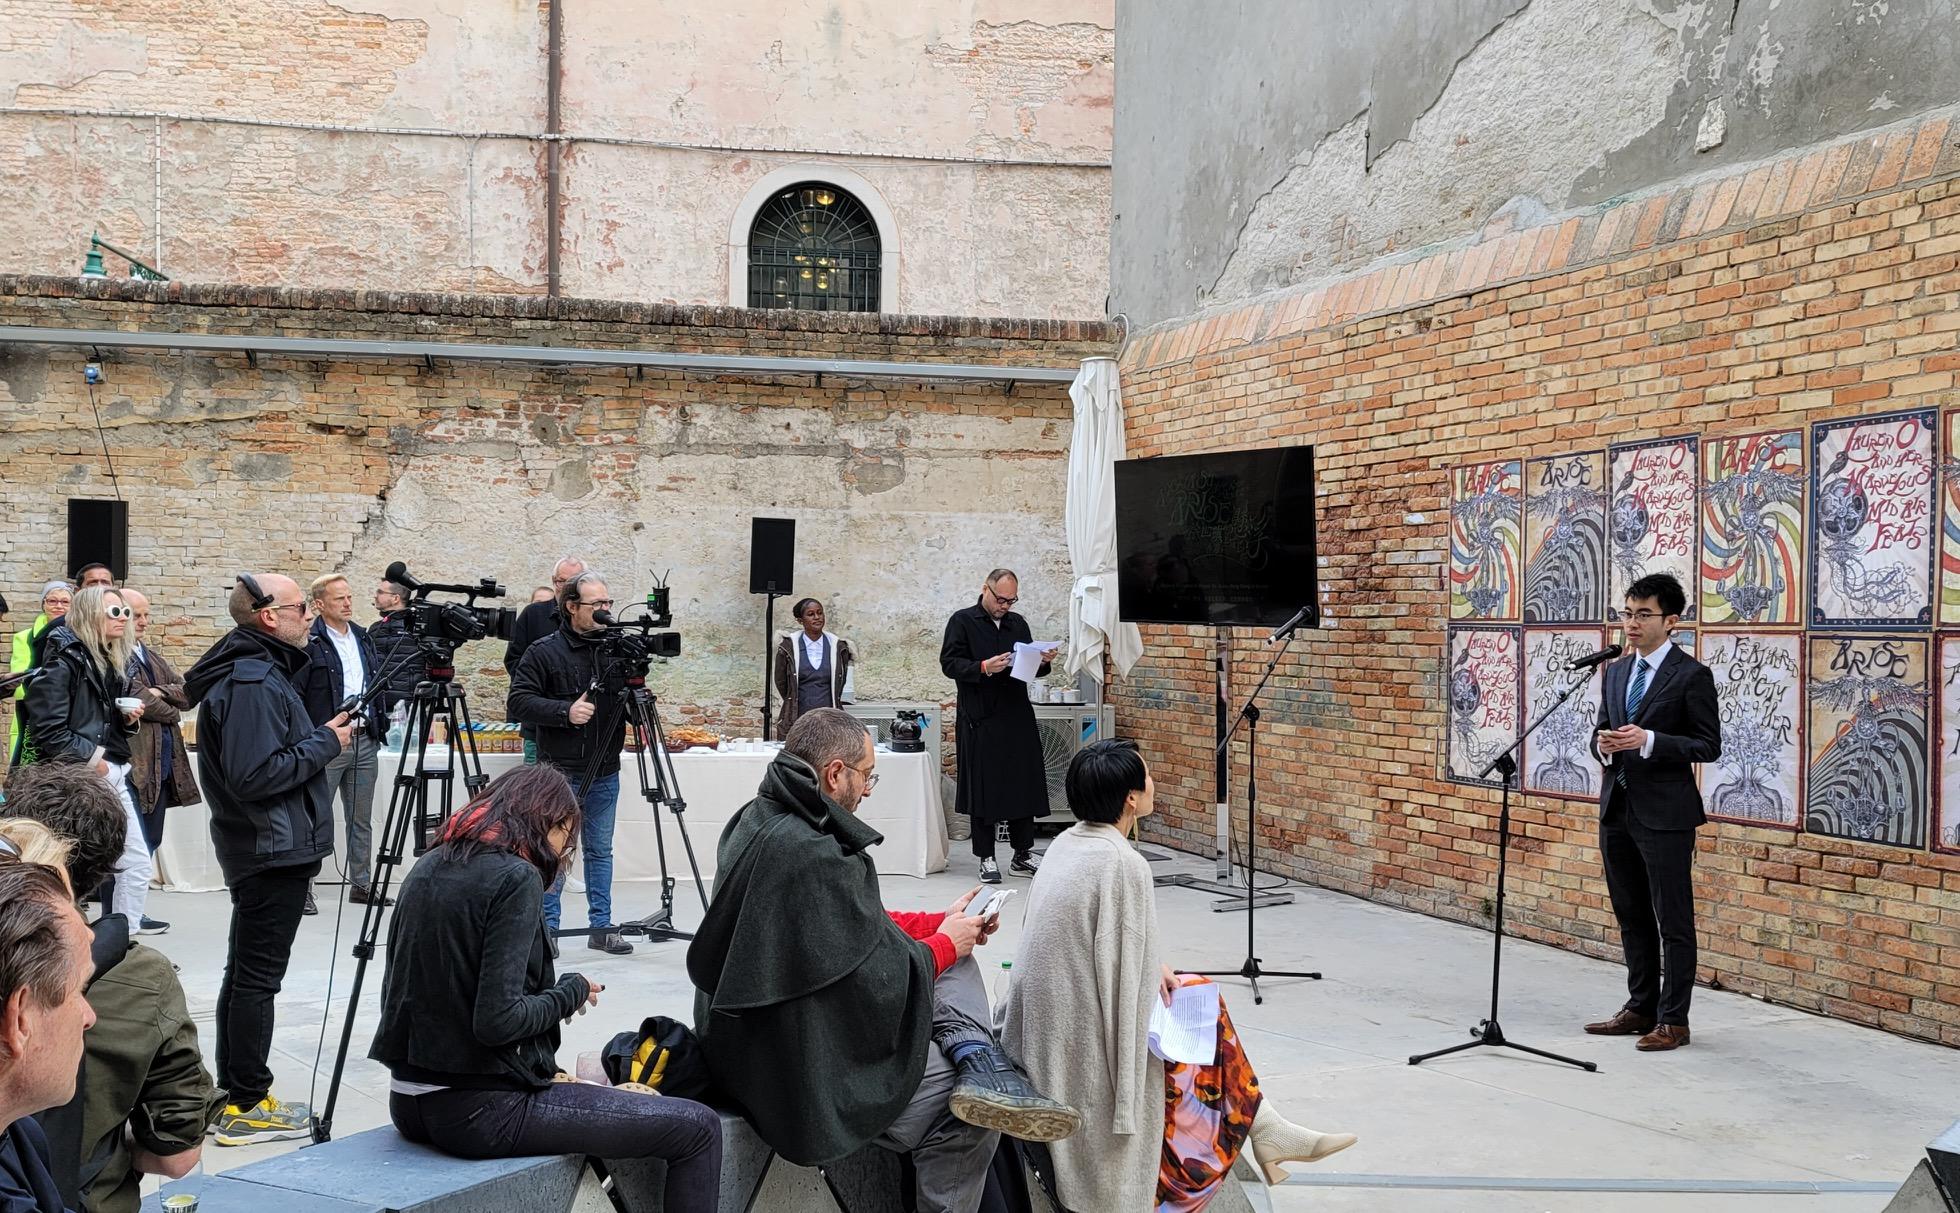 The Deputy Representative of the Hong Kong Economic and Trade Office in Brussels, Mr Henry Tsoi, addressed guests and representatives of M+ museum at the opening reception of the Hong Kong Pavilion at the Venice Biennale in Venice on April 21 (Venice time).